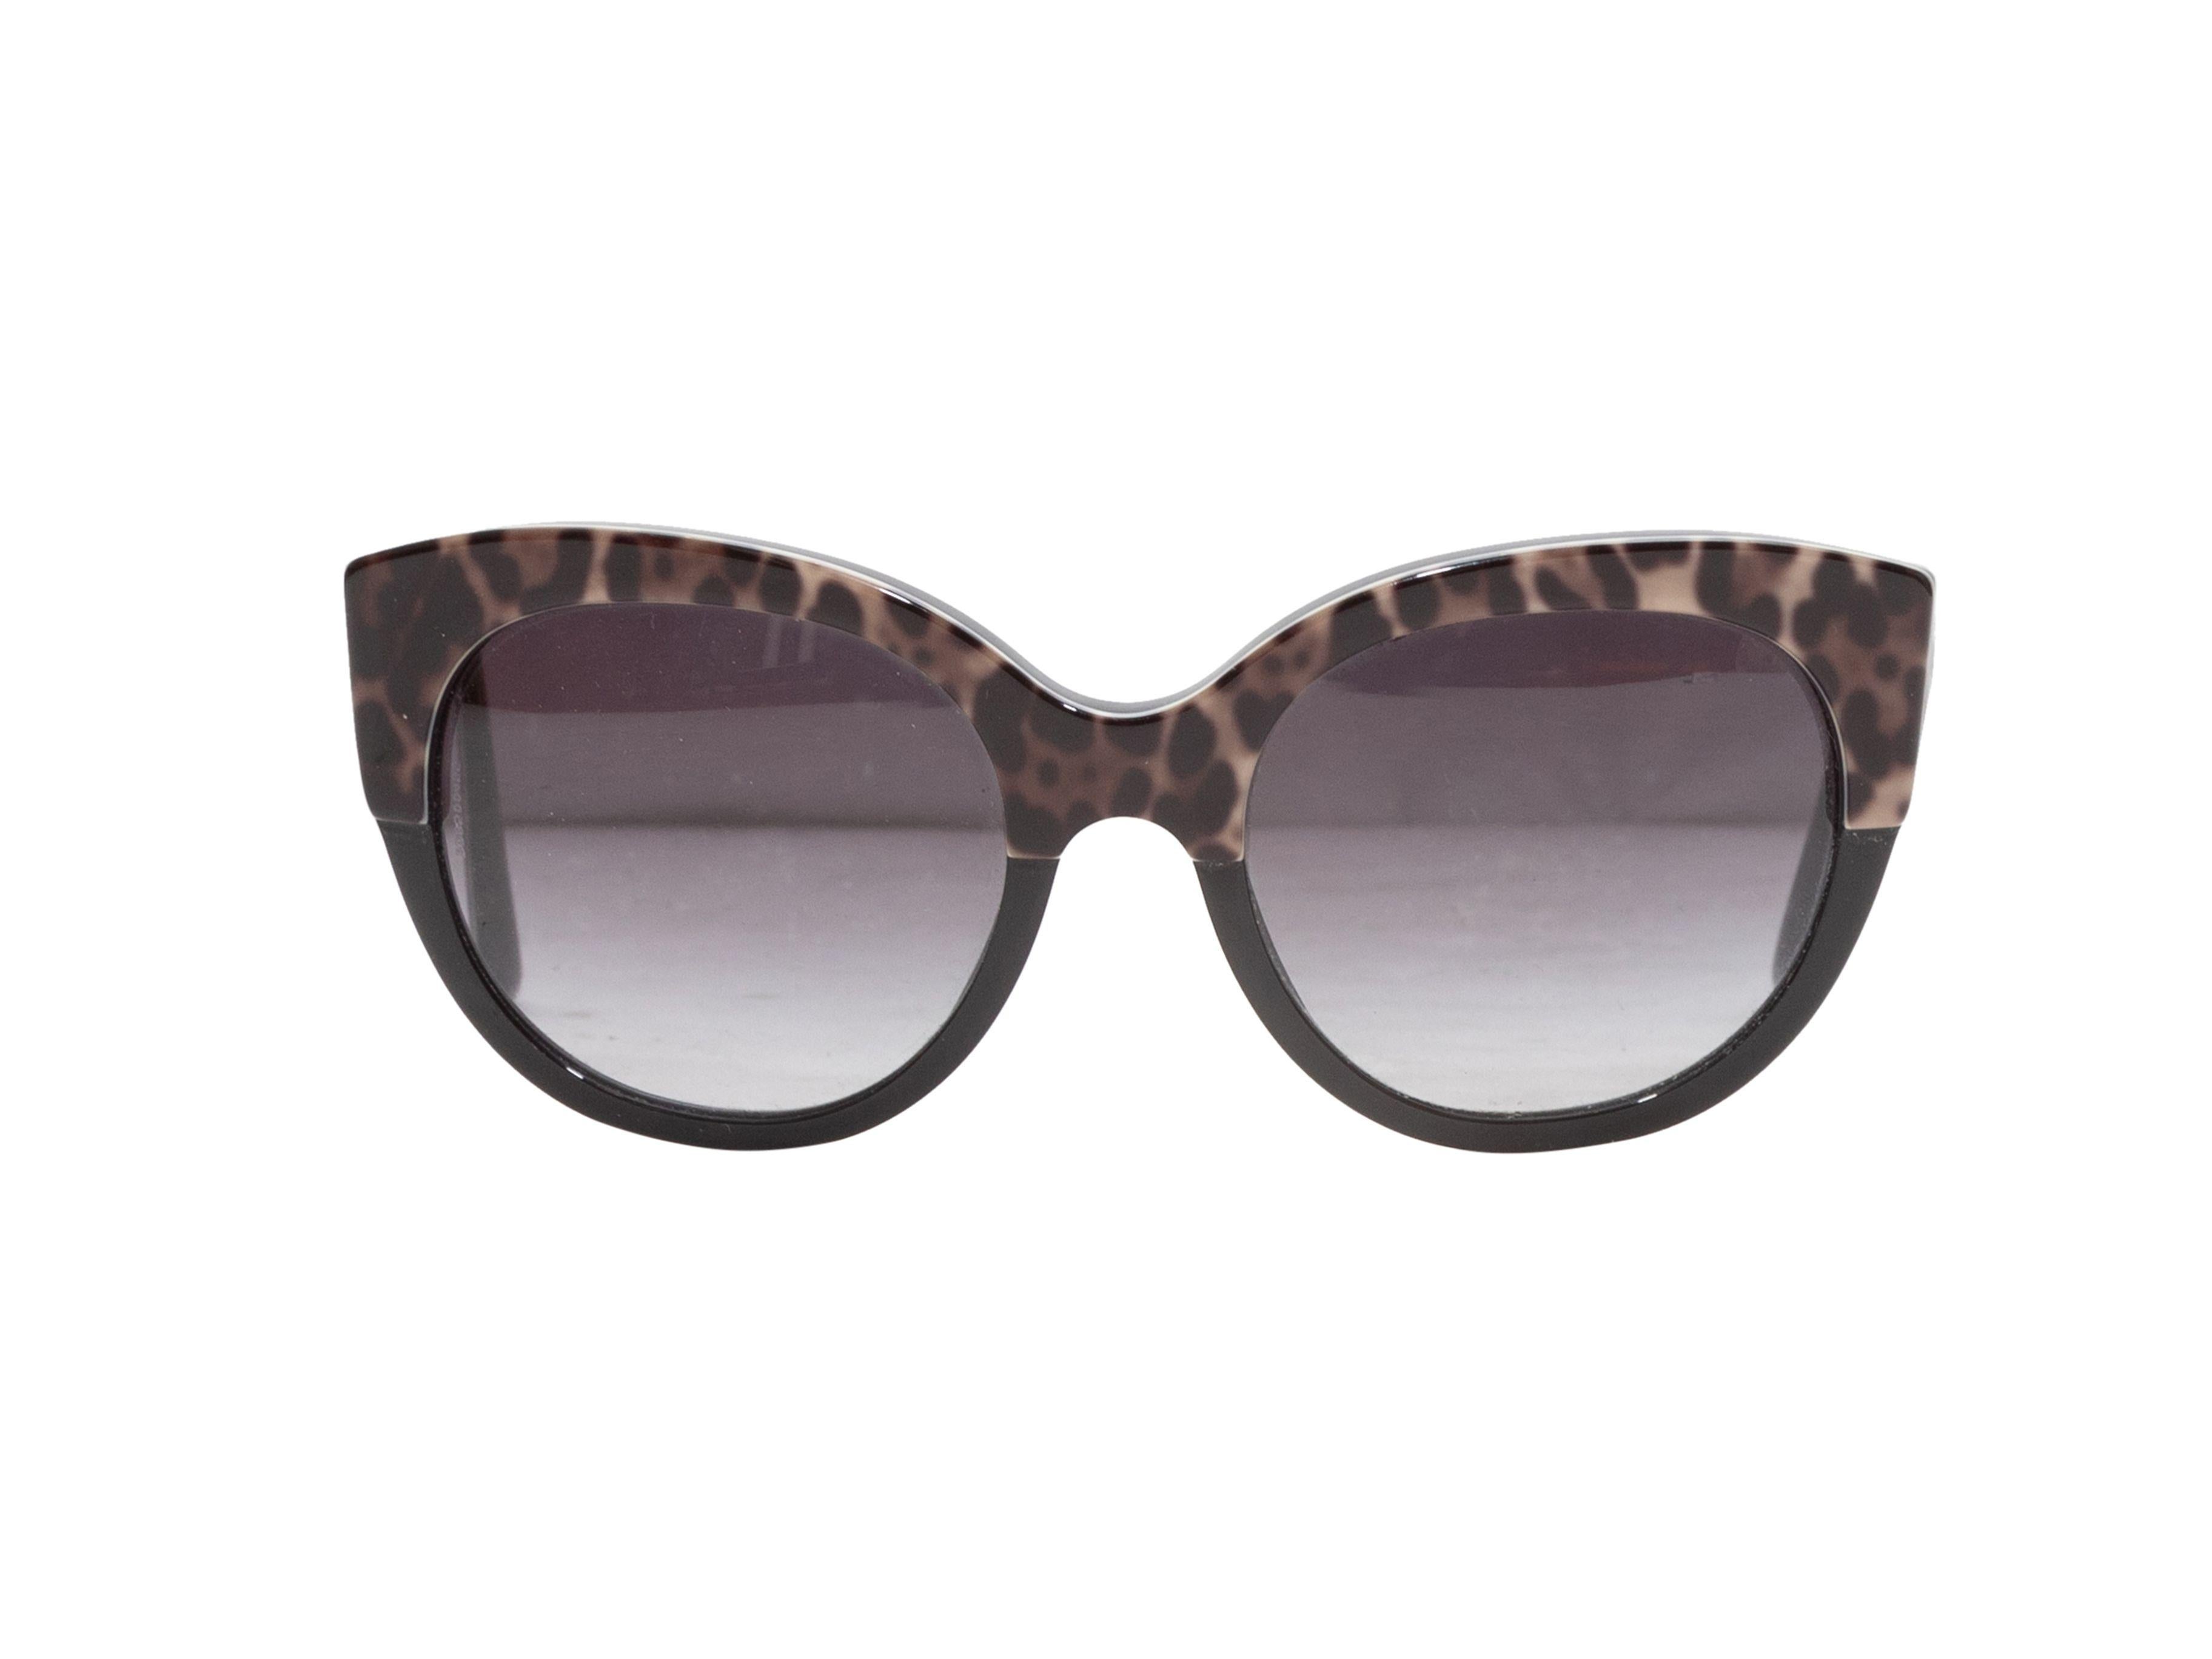 Product Details: Black and multicolor leopard print acetate sunglasses by Prada. Grey tinted lenses. 5.5